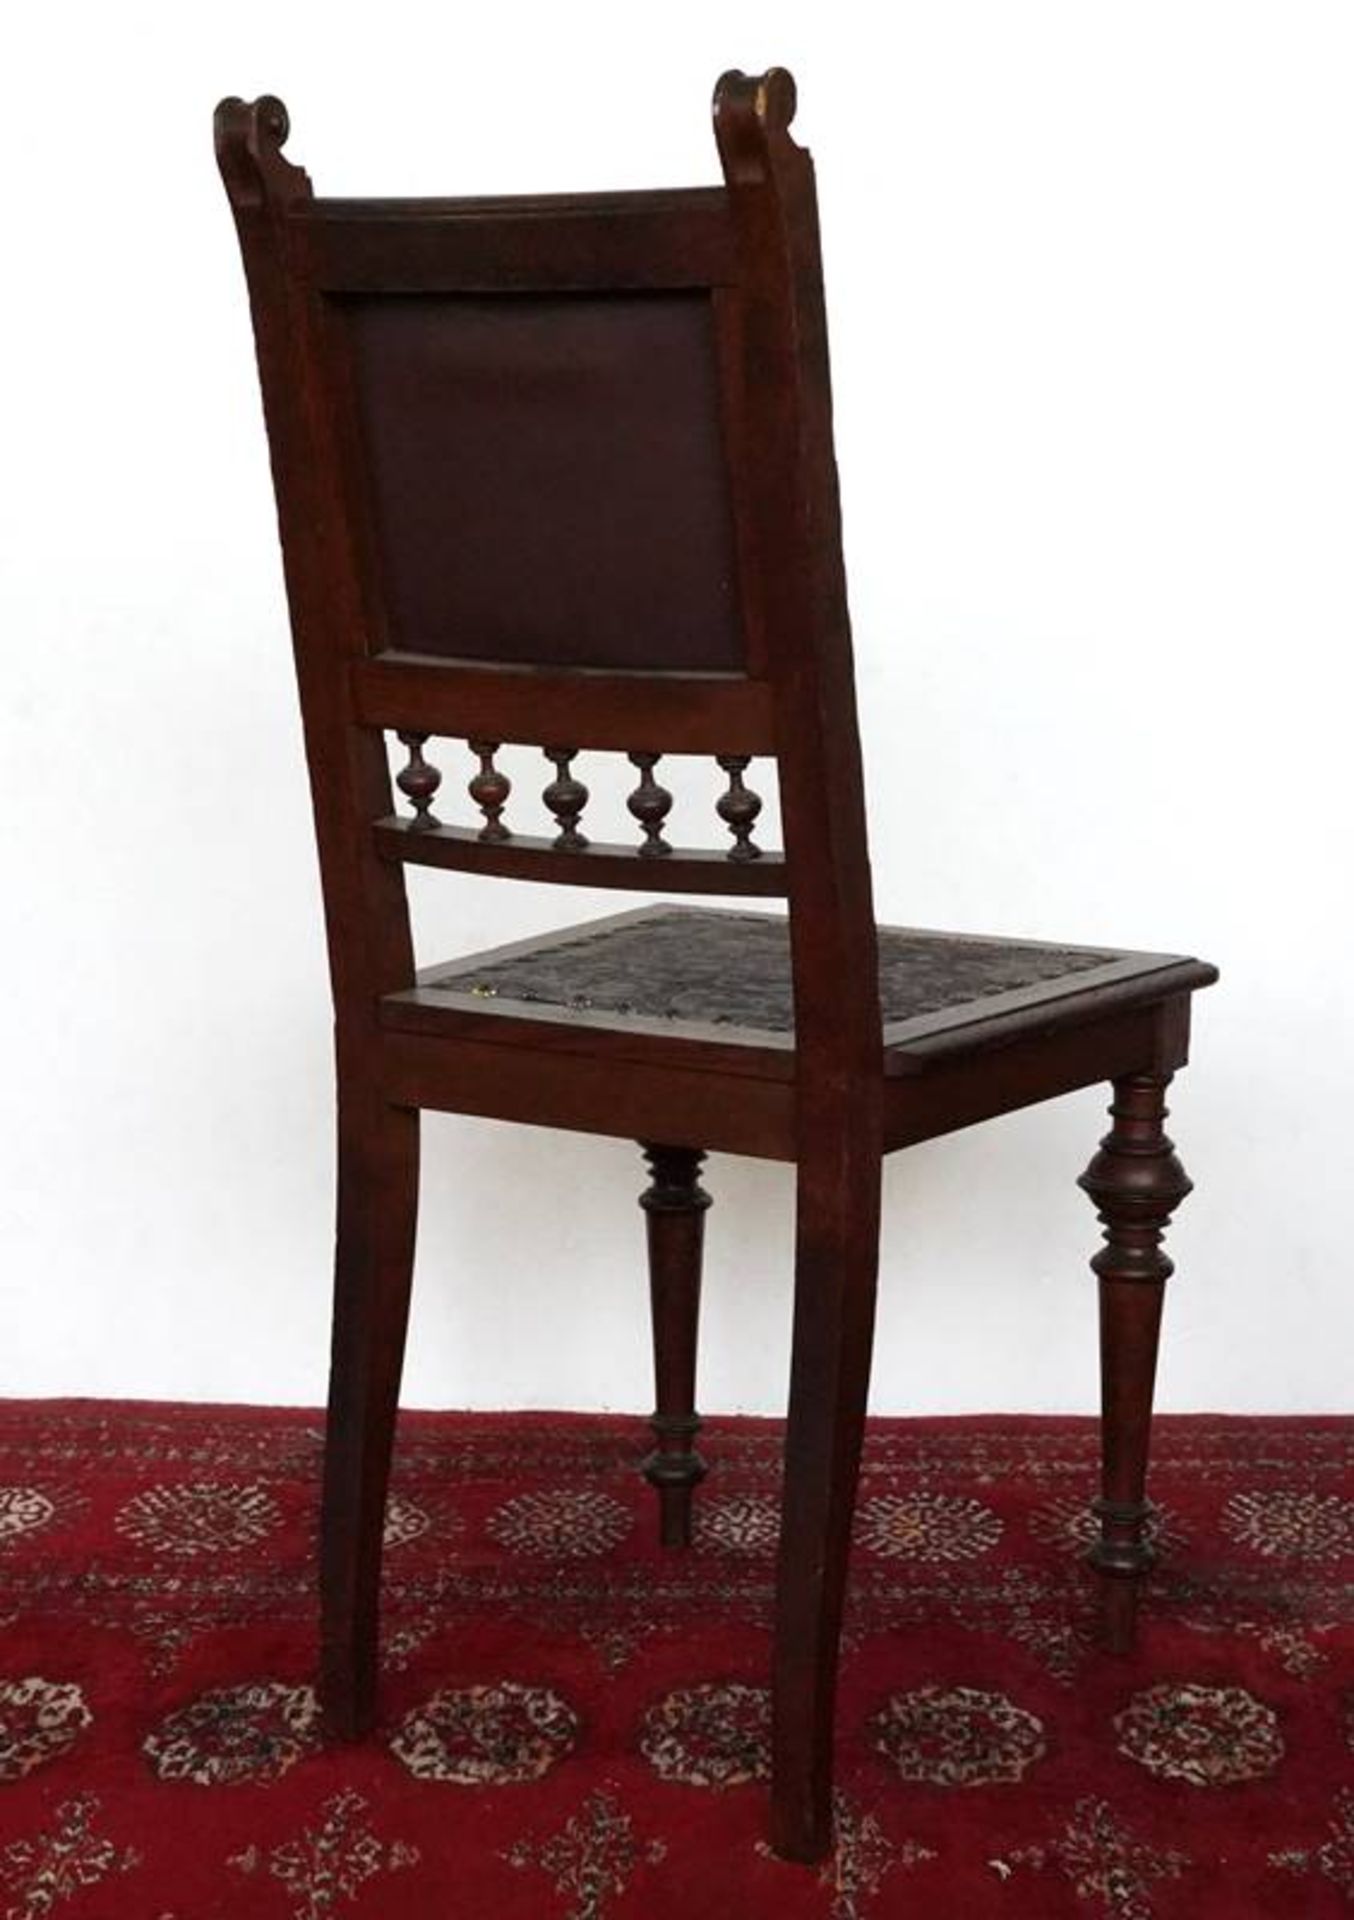 Baroque chair - Image 4 of 5